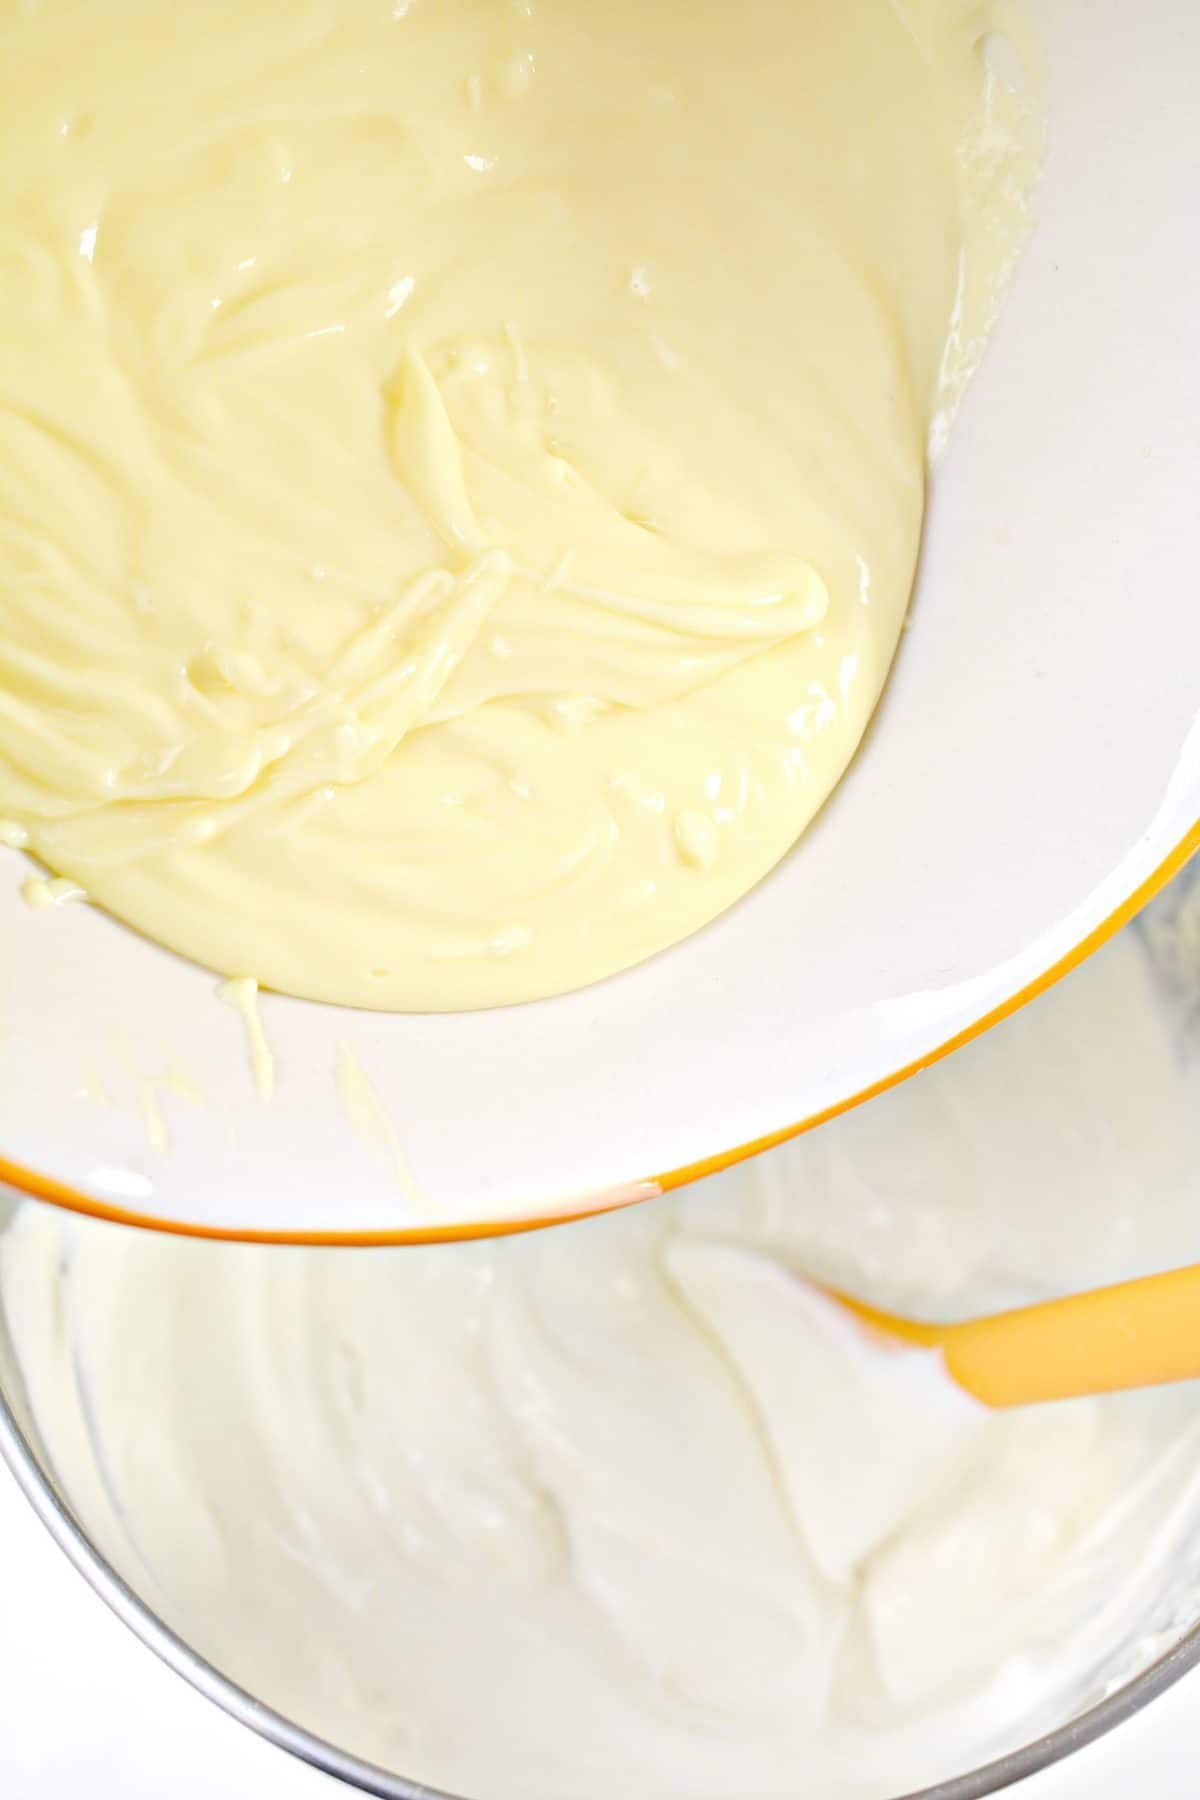 Add the pudding mixture to the cream cheese and whipped topping mixture, and stir until completely combined.